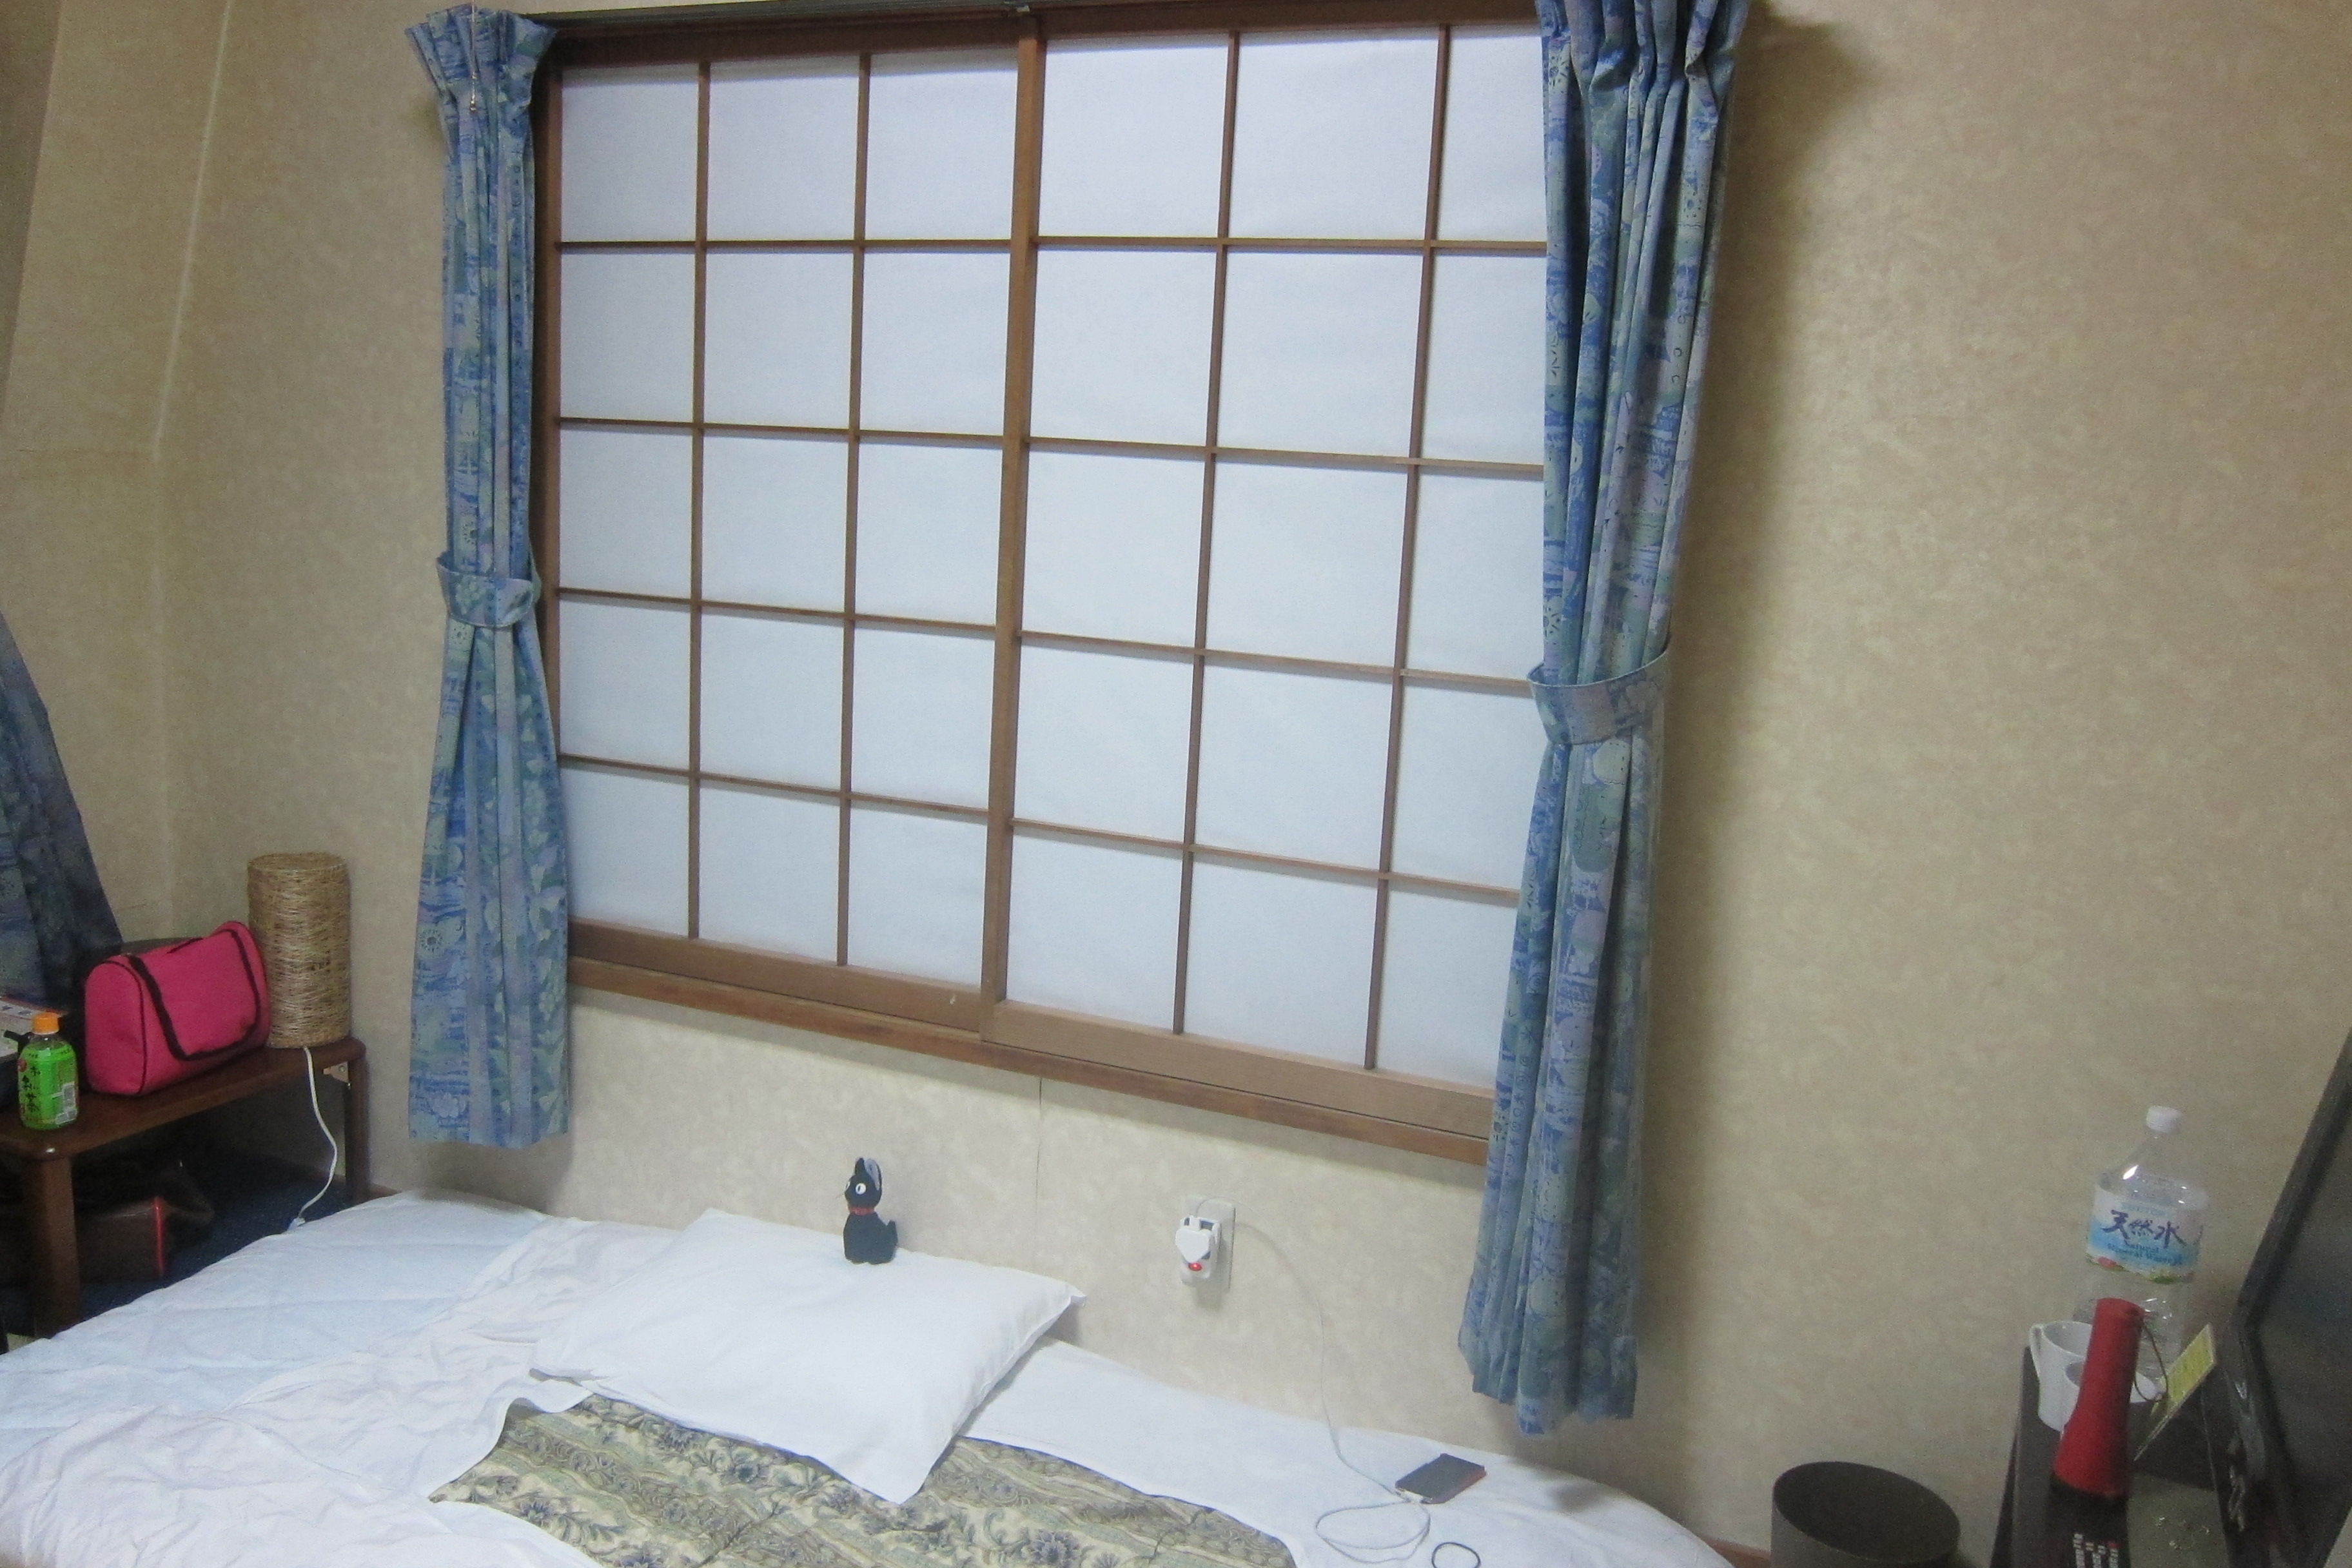 Ryokan Stay An Authentic Japanese Culture Experience